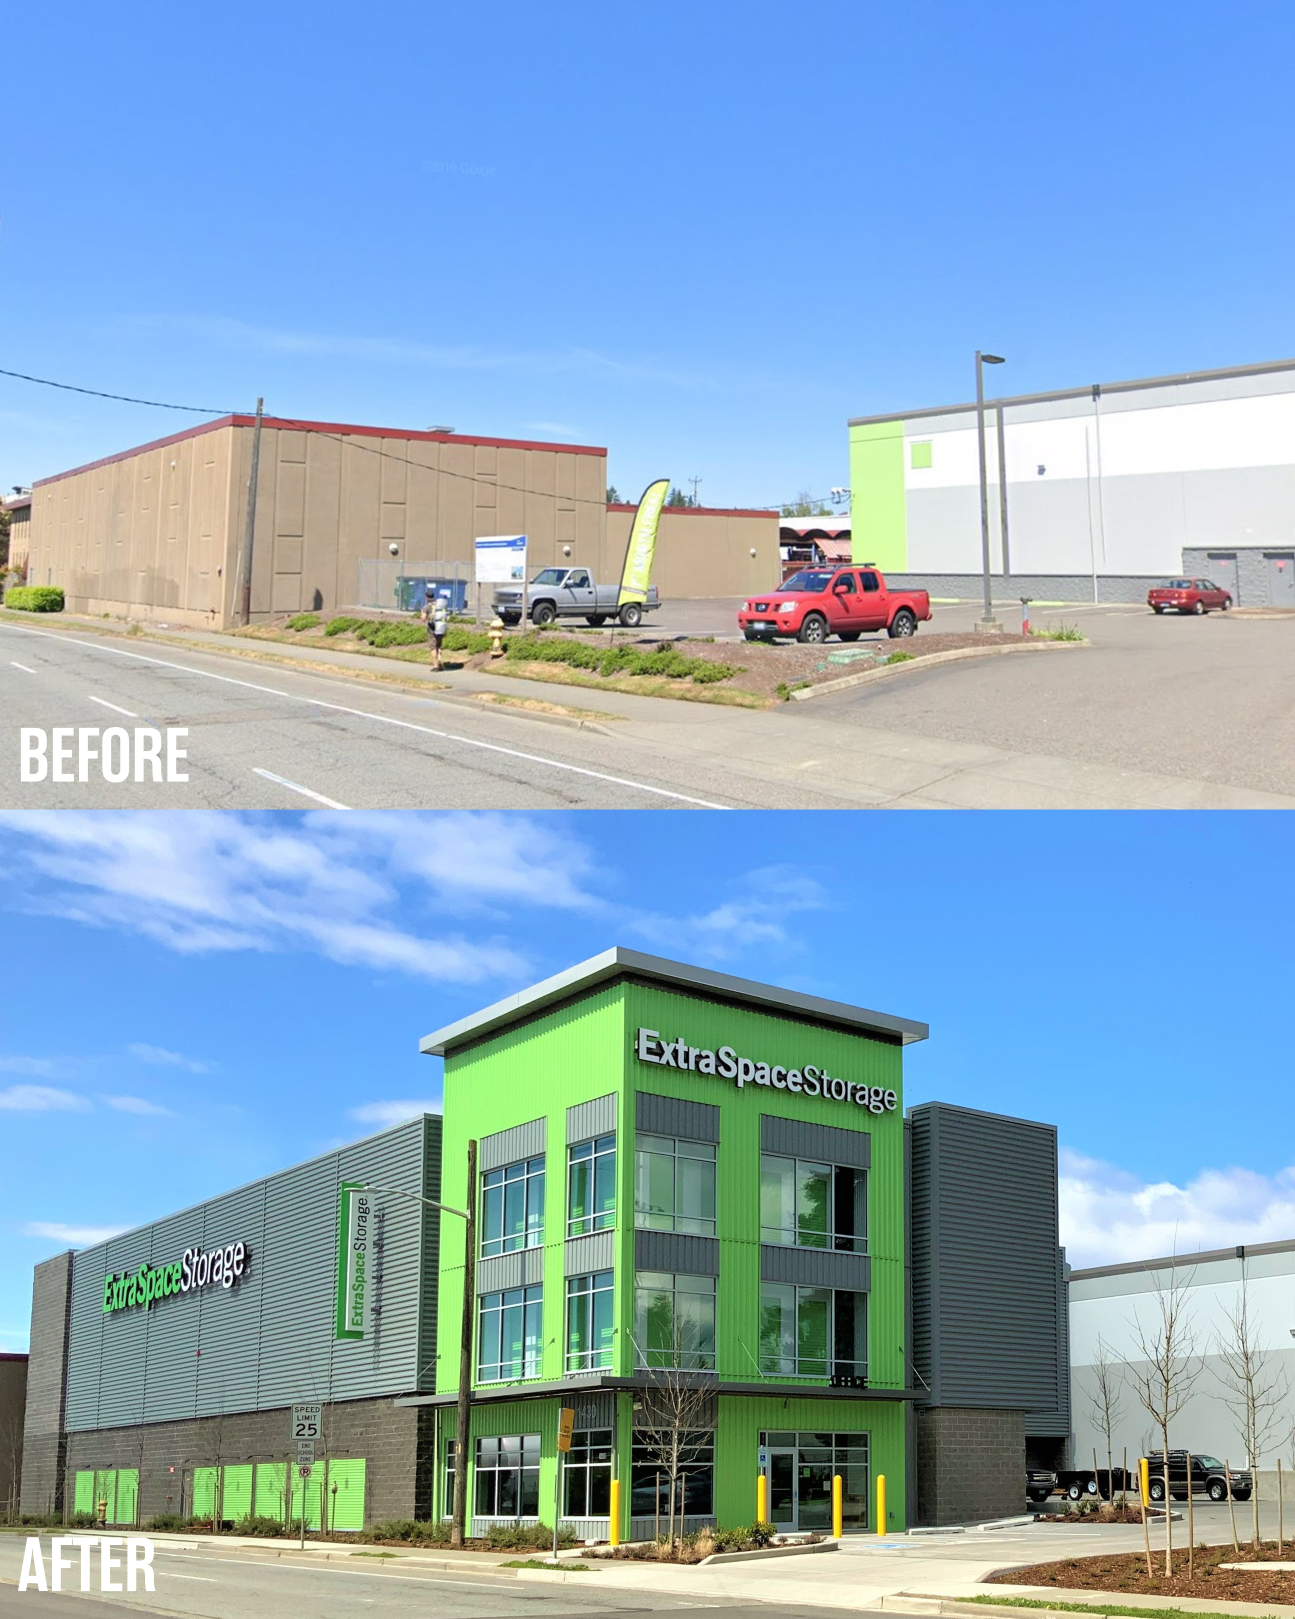 Before & After Photo for Extra Space Storage Facility Update: 1430 N 130th St, Seattle, WA